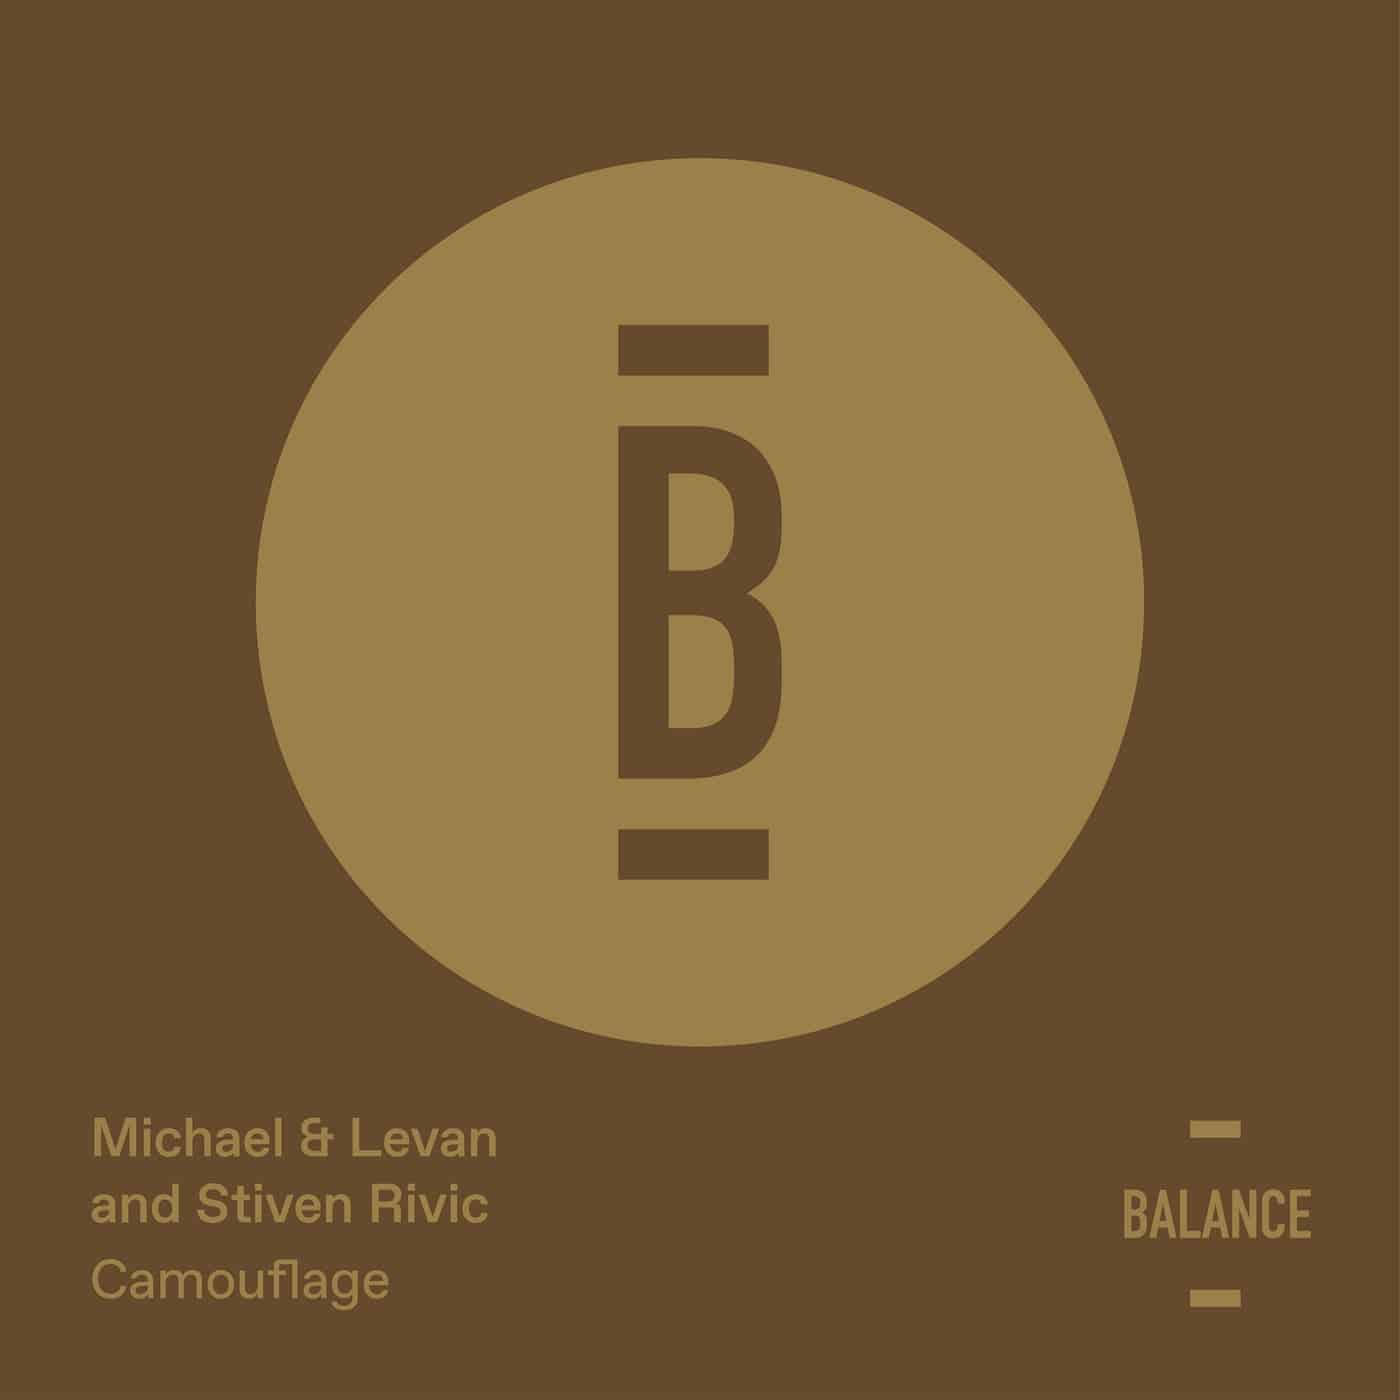 image cover: Stiven Rivic, Michael & Levan - Camouflage / BALANCE033EP